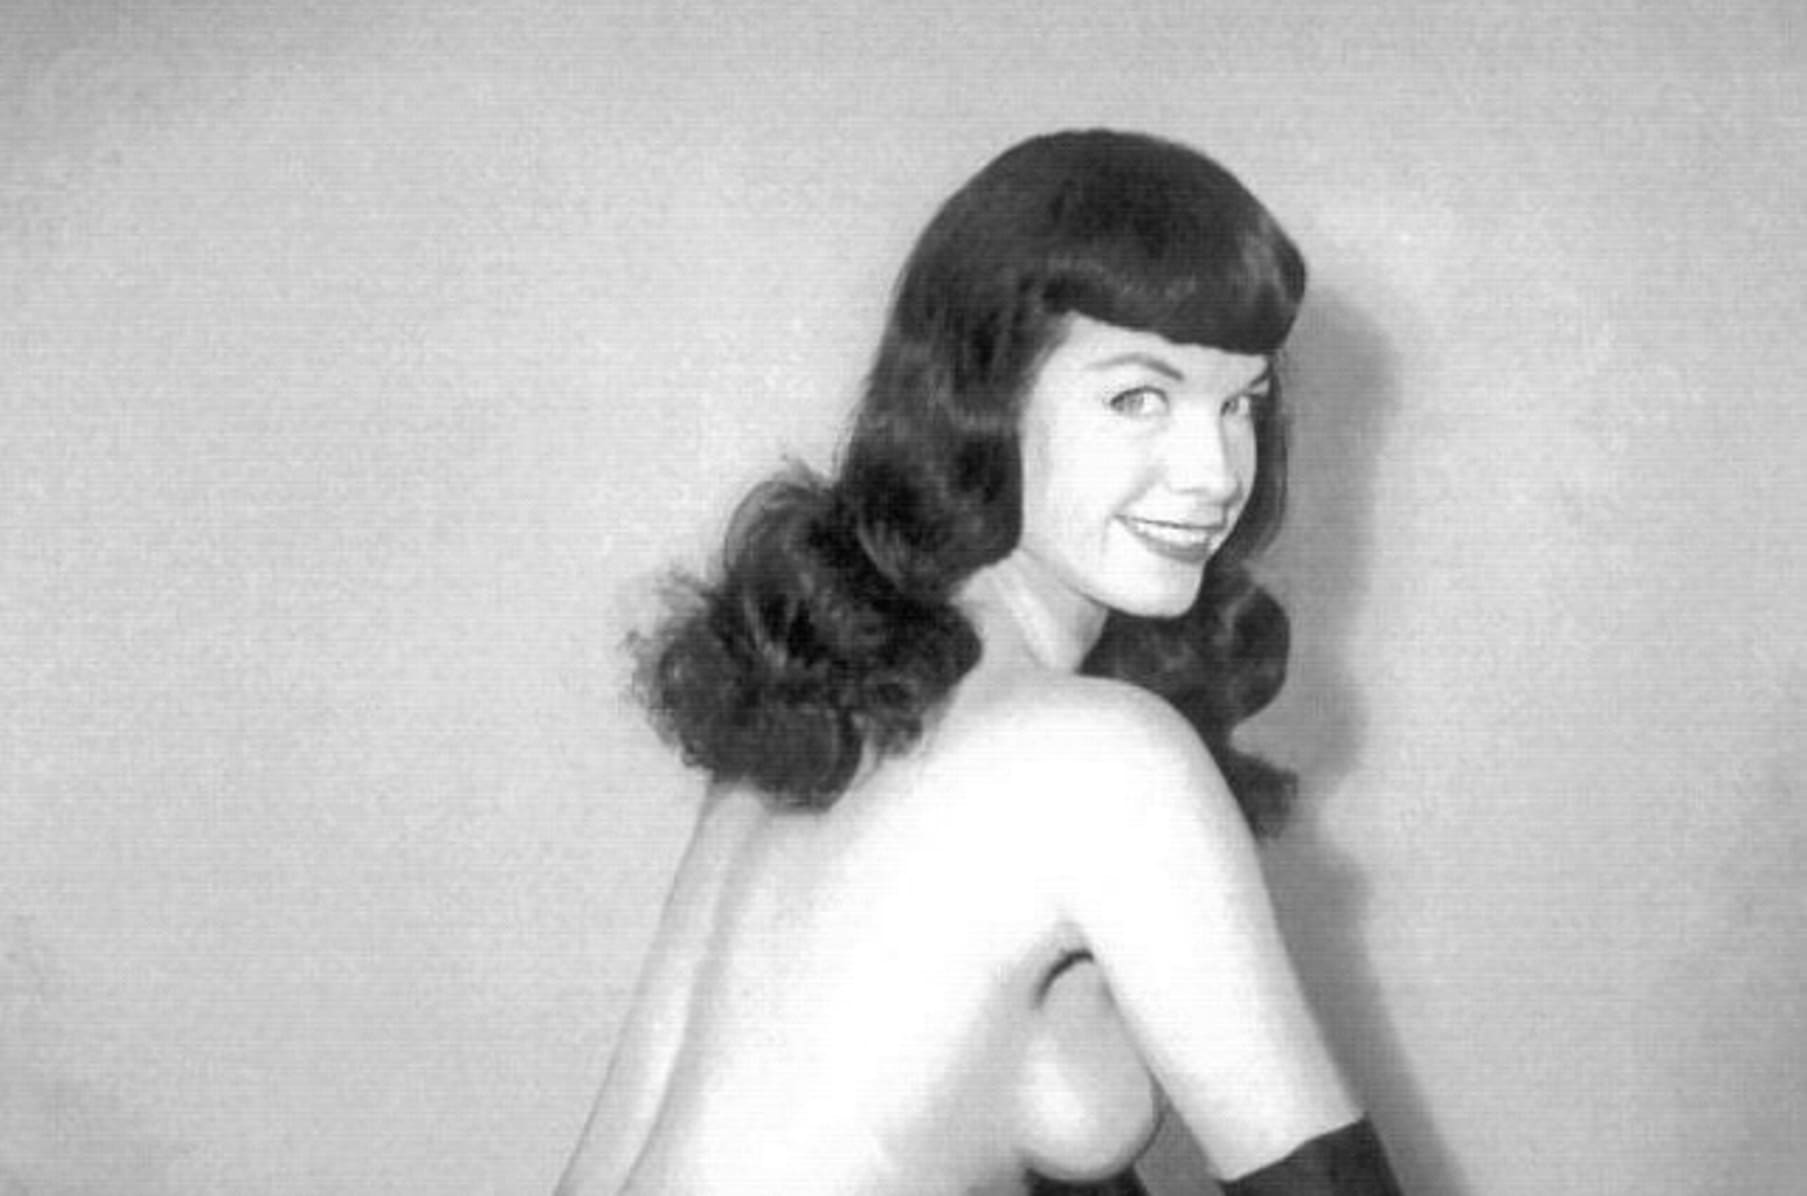 Bettie Page's 'lost years' revealed in 'treasure trove' of unseen